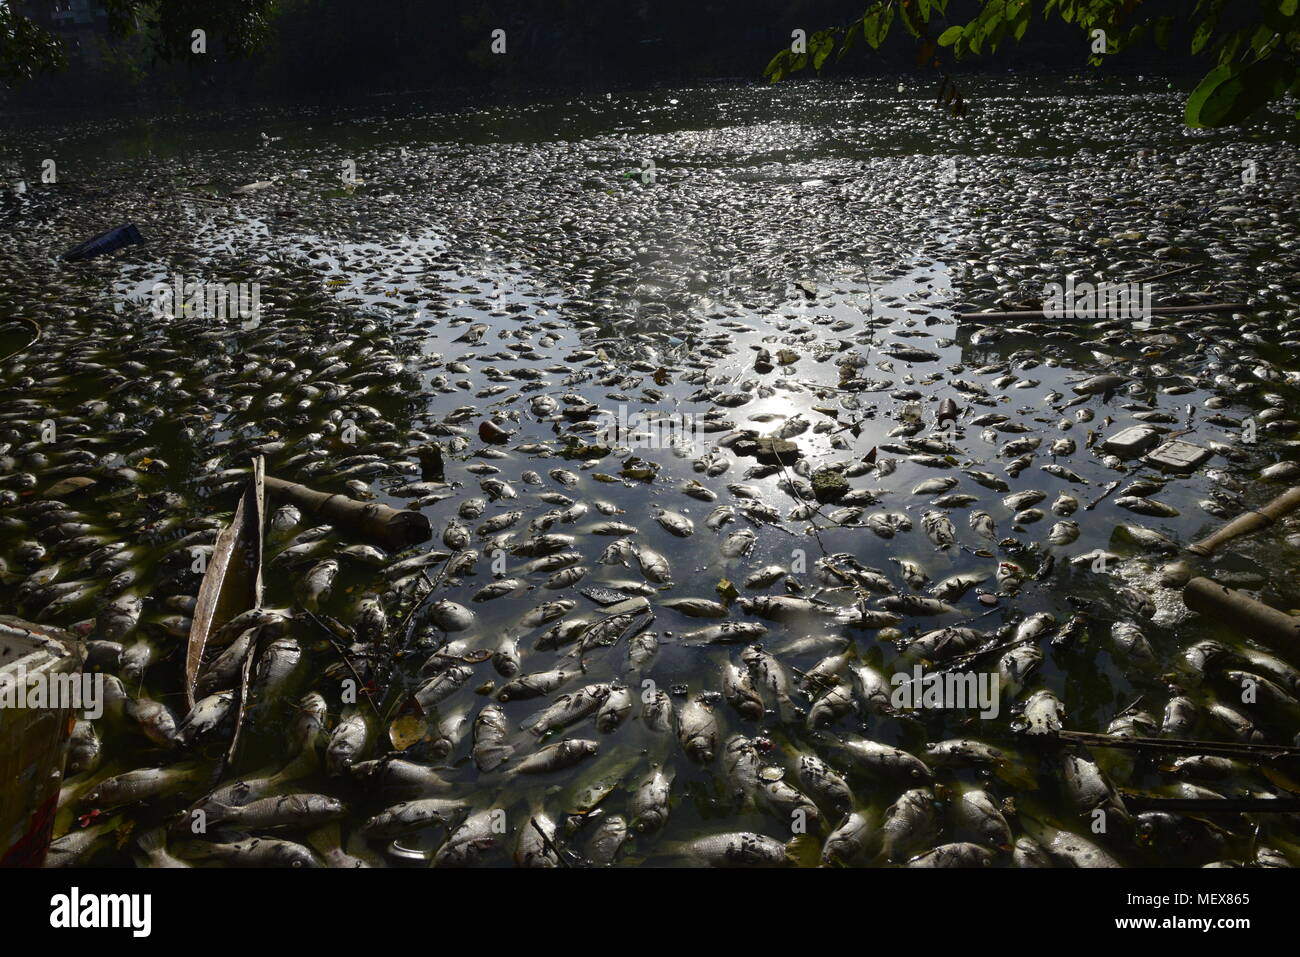 Thousands of dead fishes float in the Uttara Lake in Dhaka City, Bangladesh, on November 11, 2017. Chemical pollutions or abnormal change in the pH (p Stock Photo